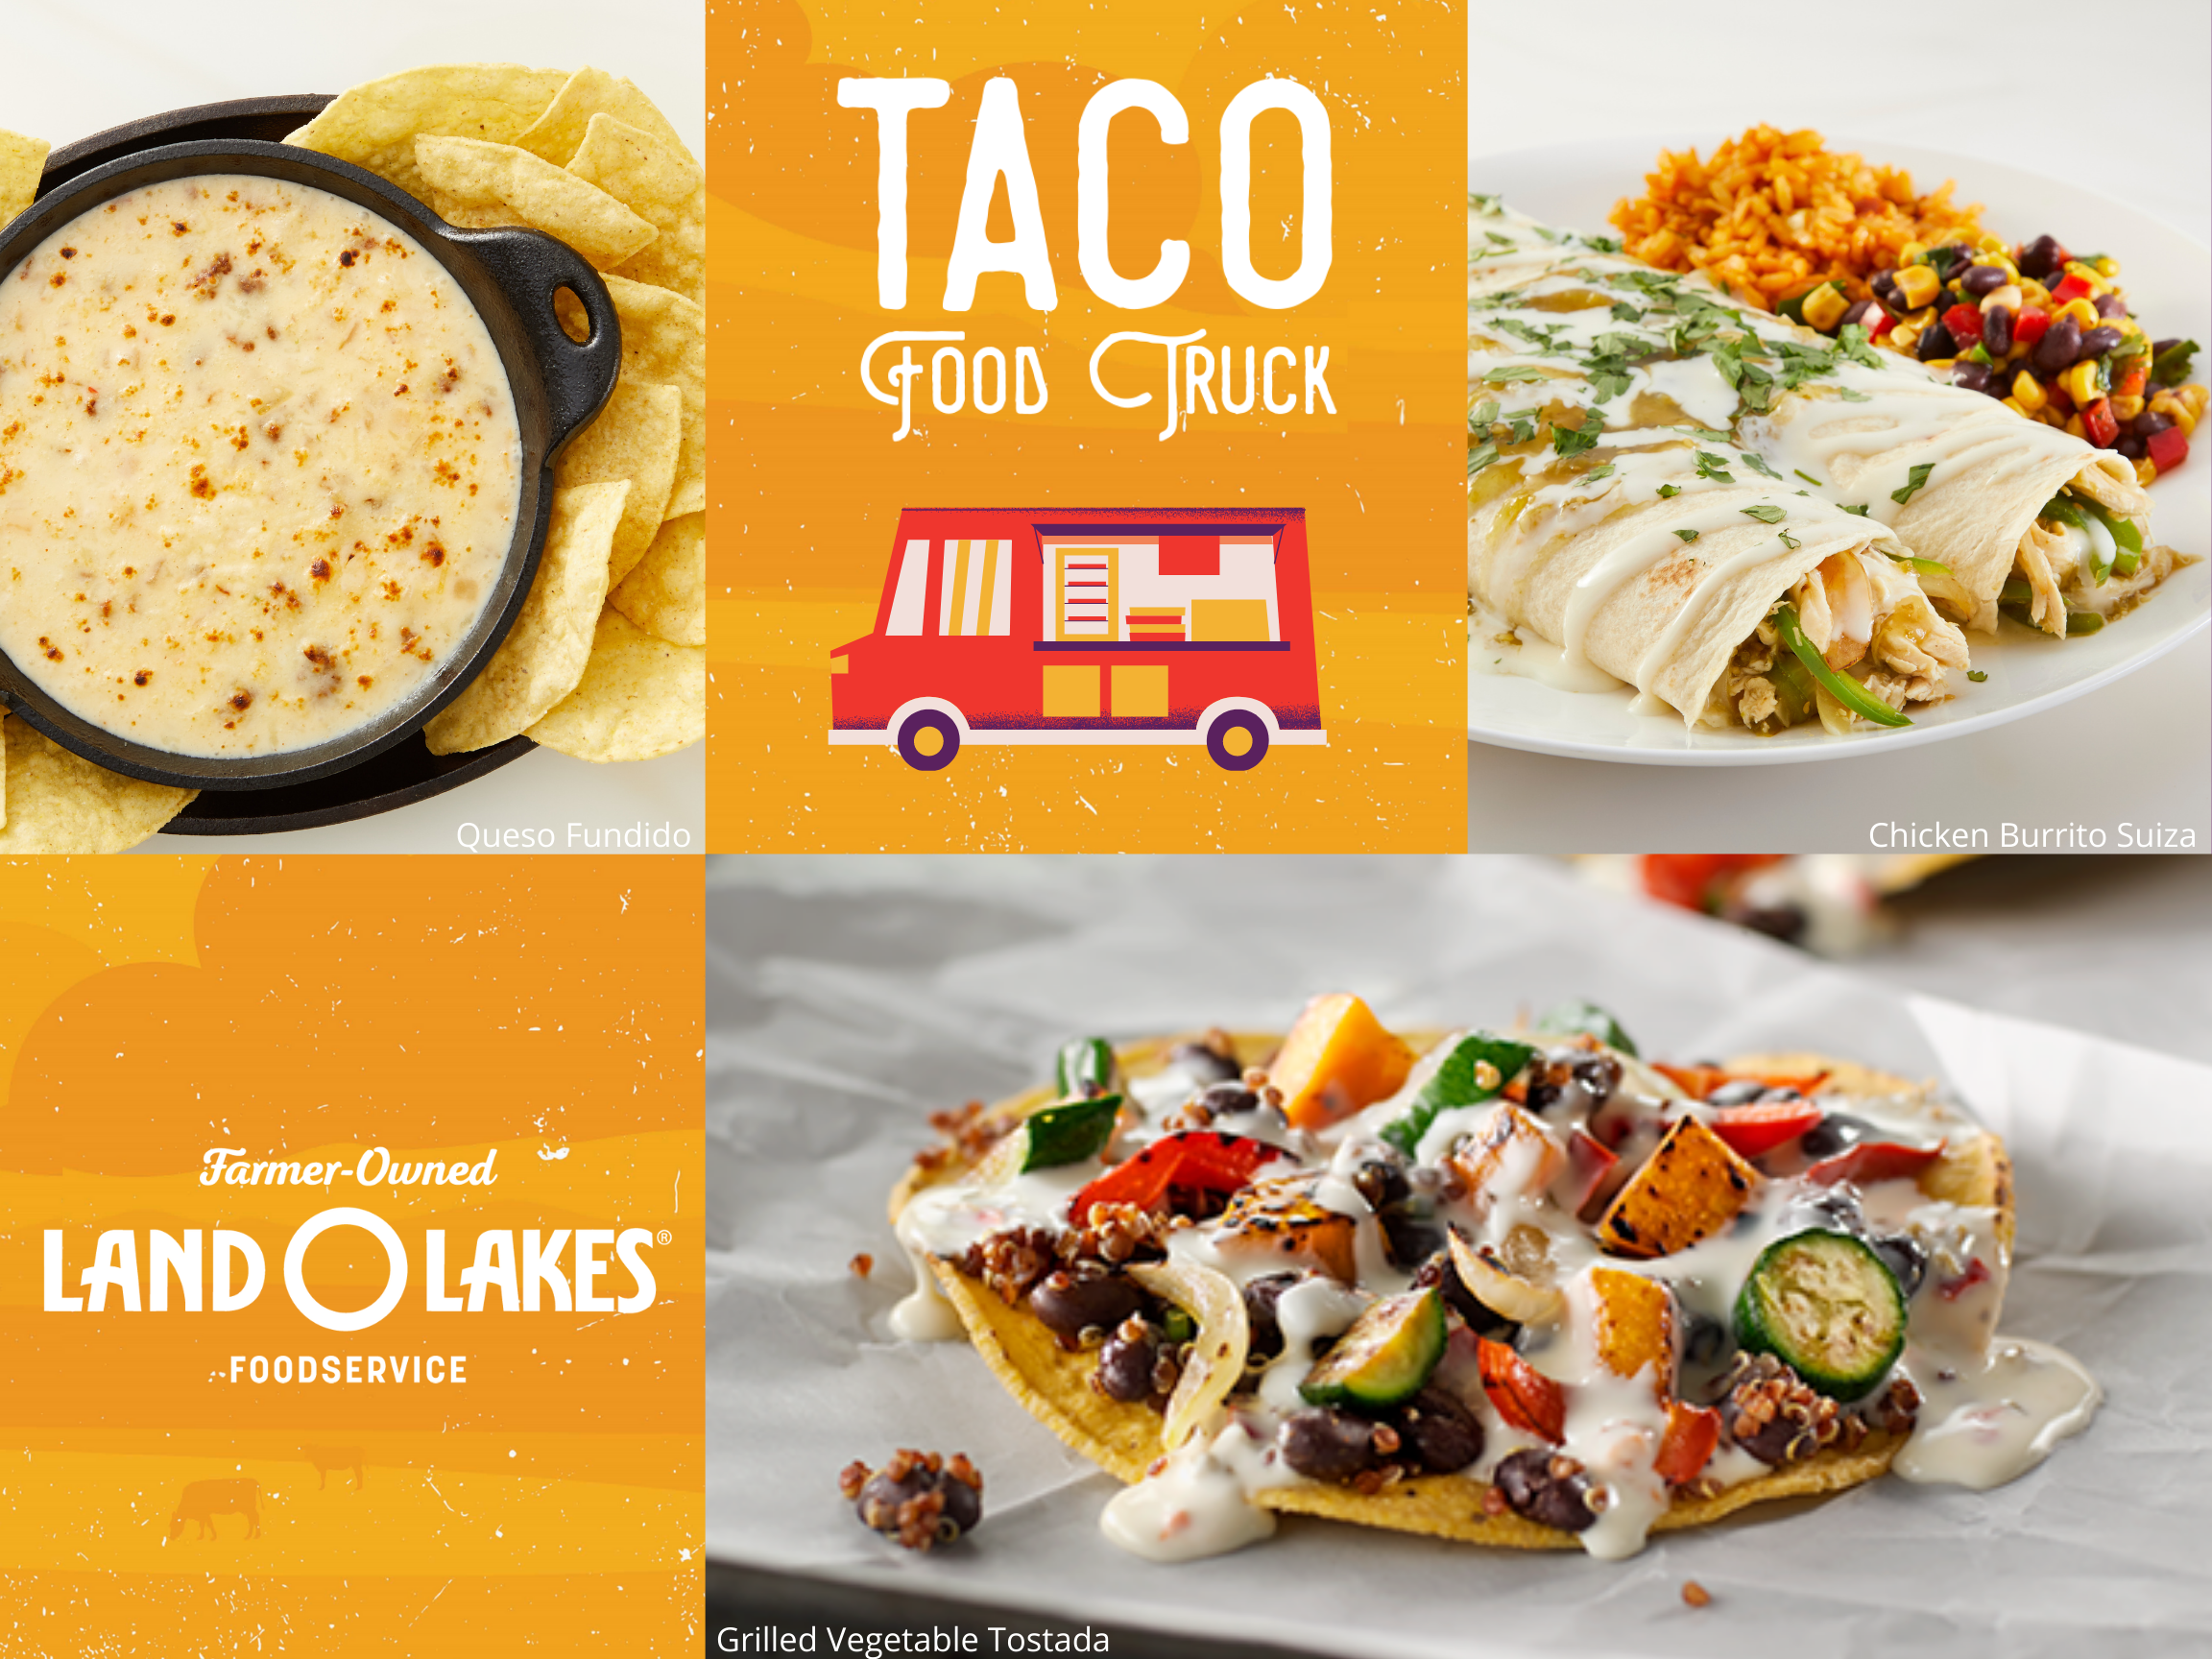 Land O'Lakes Foodservice Taco Truck Menu Inspiration featuring Chipotle Queso Bravo Sauce, Chicken Burrito Suiza, and Grilled vegetable Tostada with Queso Bravo Cheese Dip